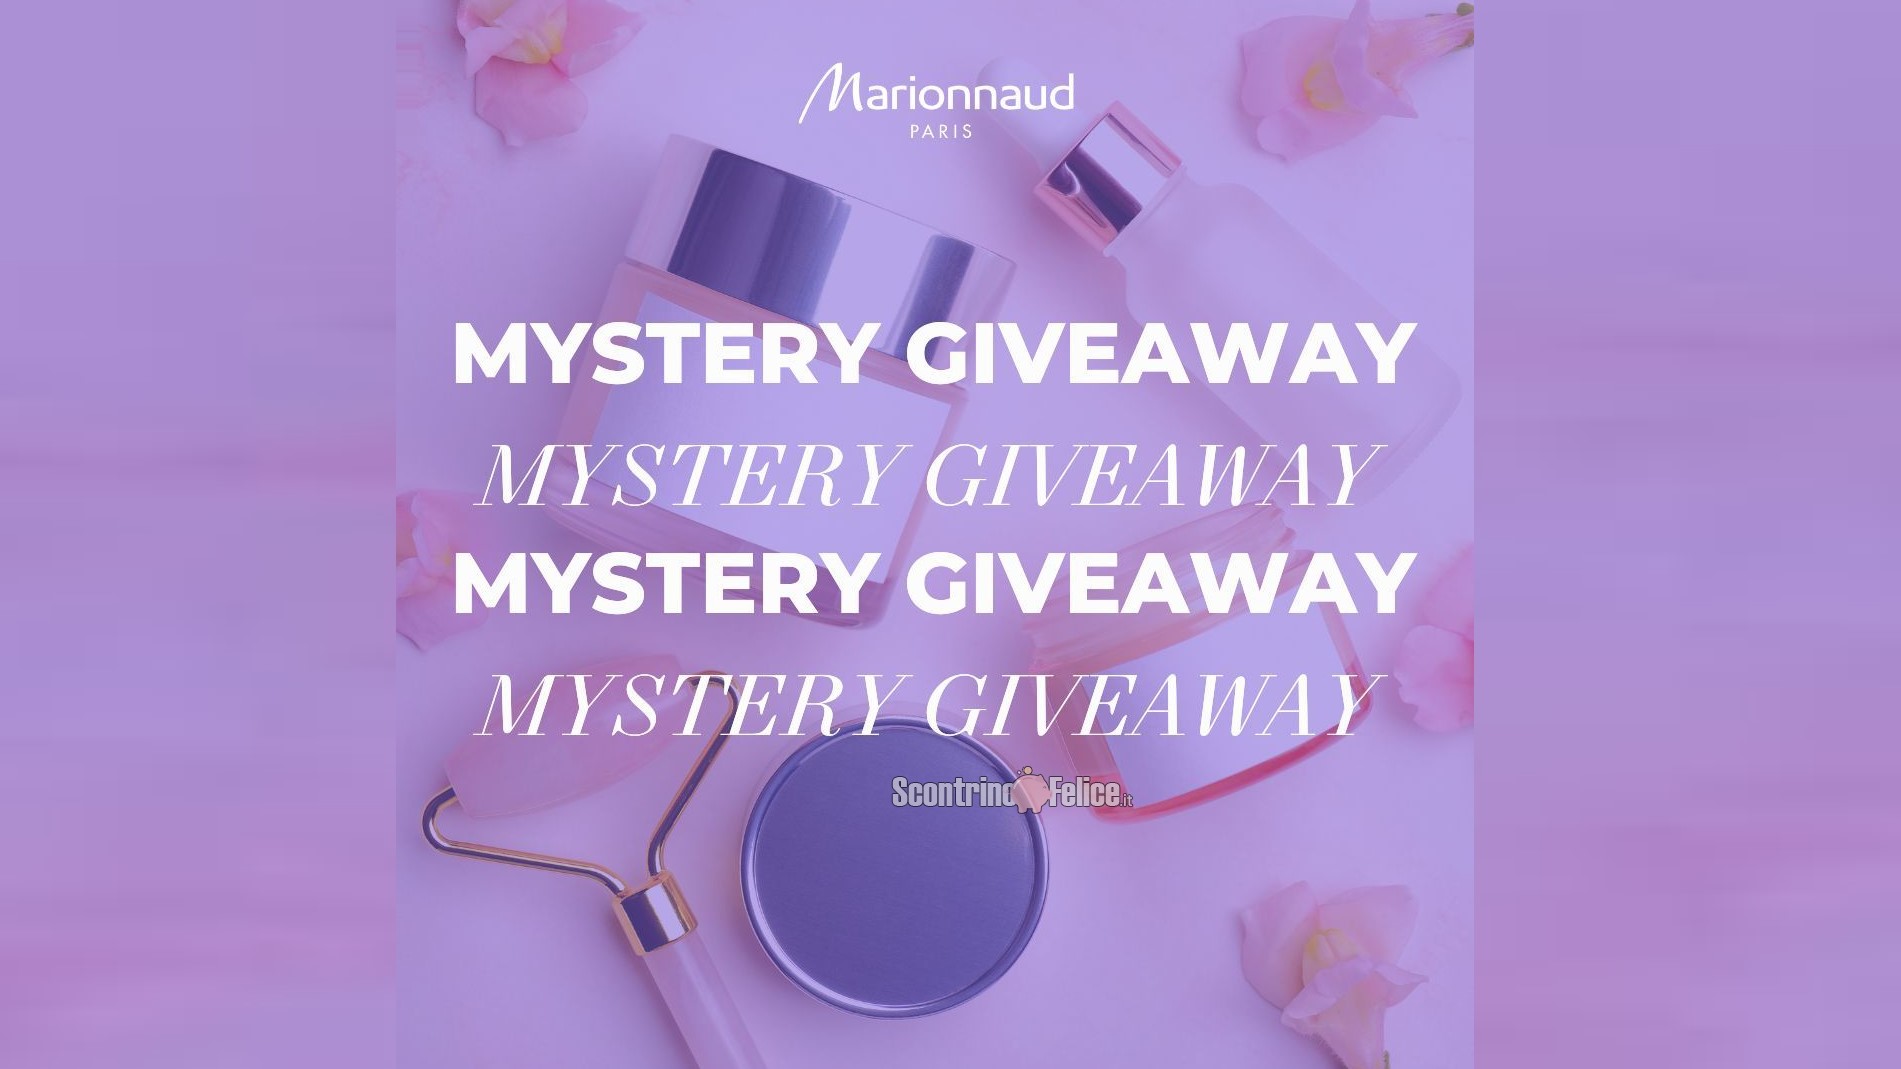 Giveaway Marionnaud vinci 3 mystery box